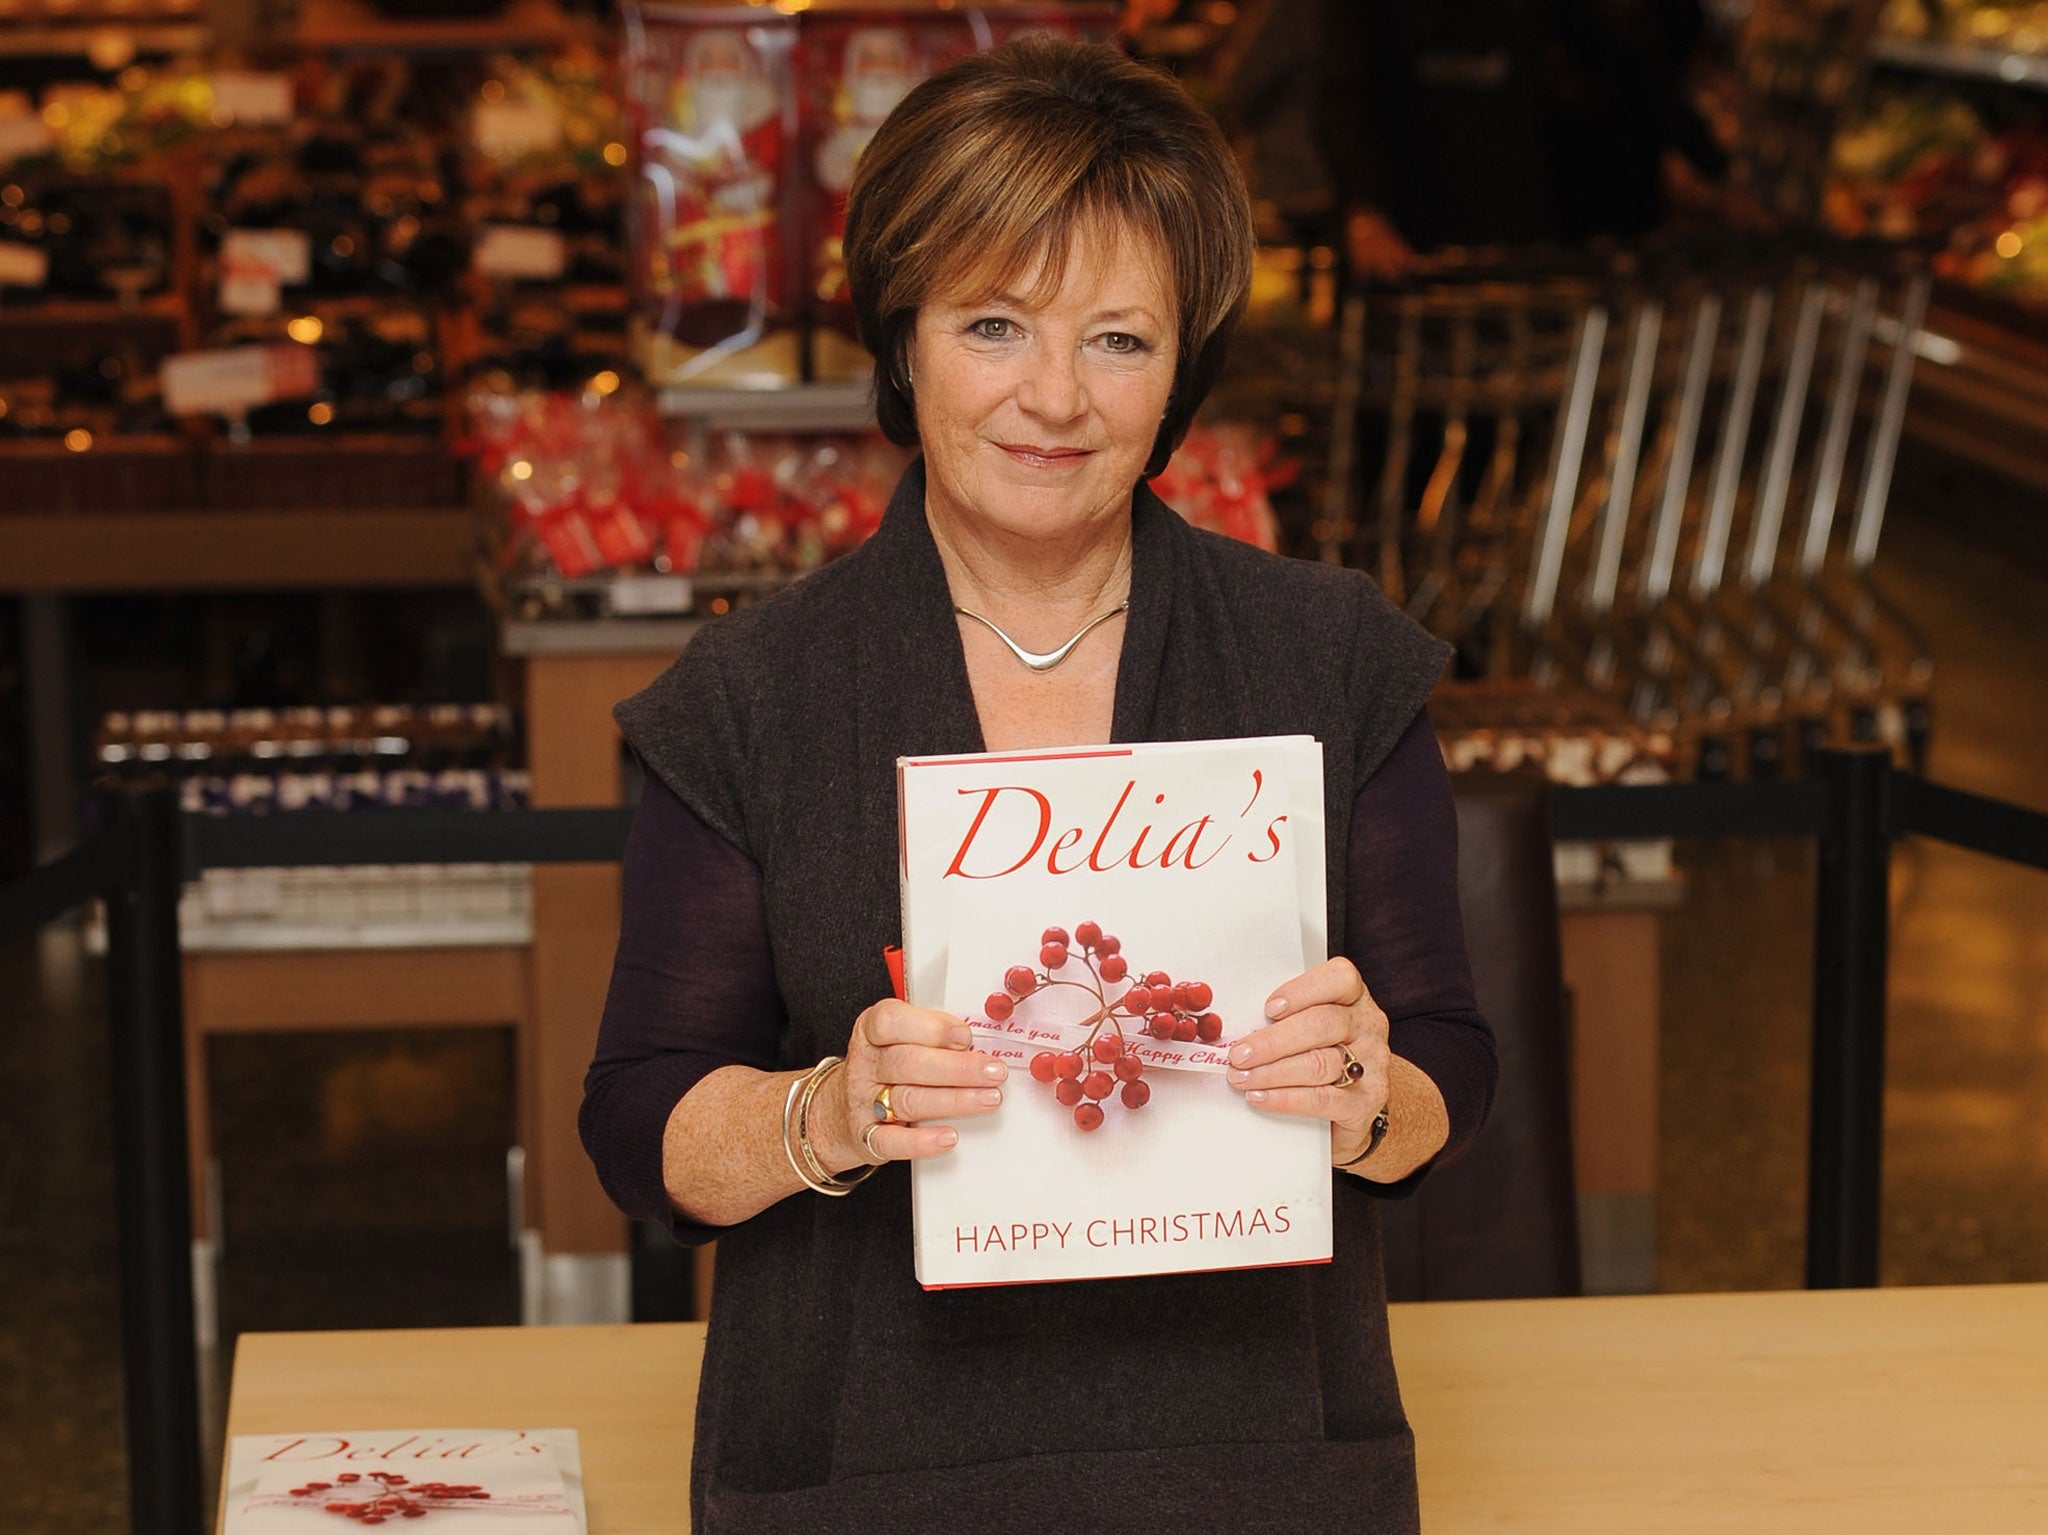 Delia Smith attends a book signing event for her latest cookery book 'Delia's Happy Christmas' at John Lewis, Oxford Street on December 3, 2009 in London, England.